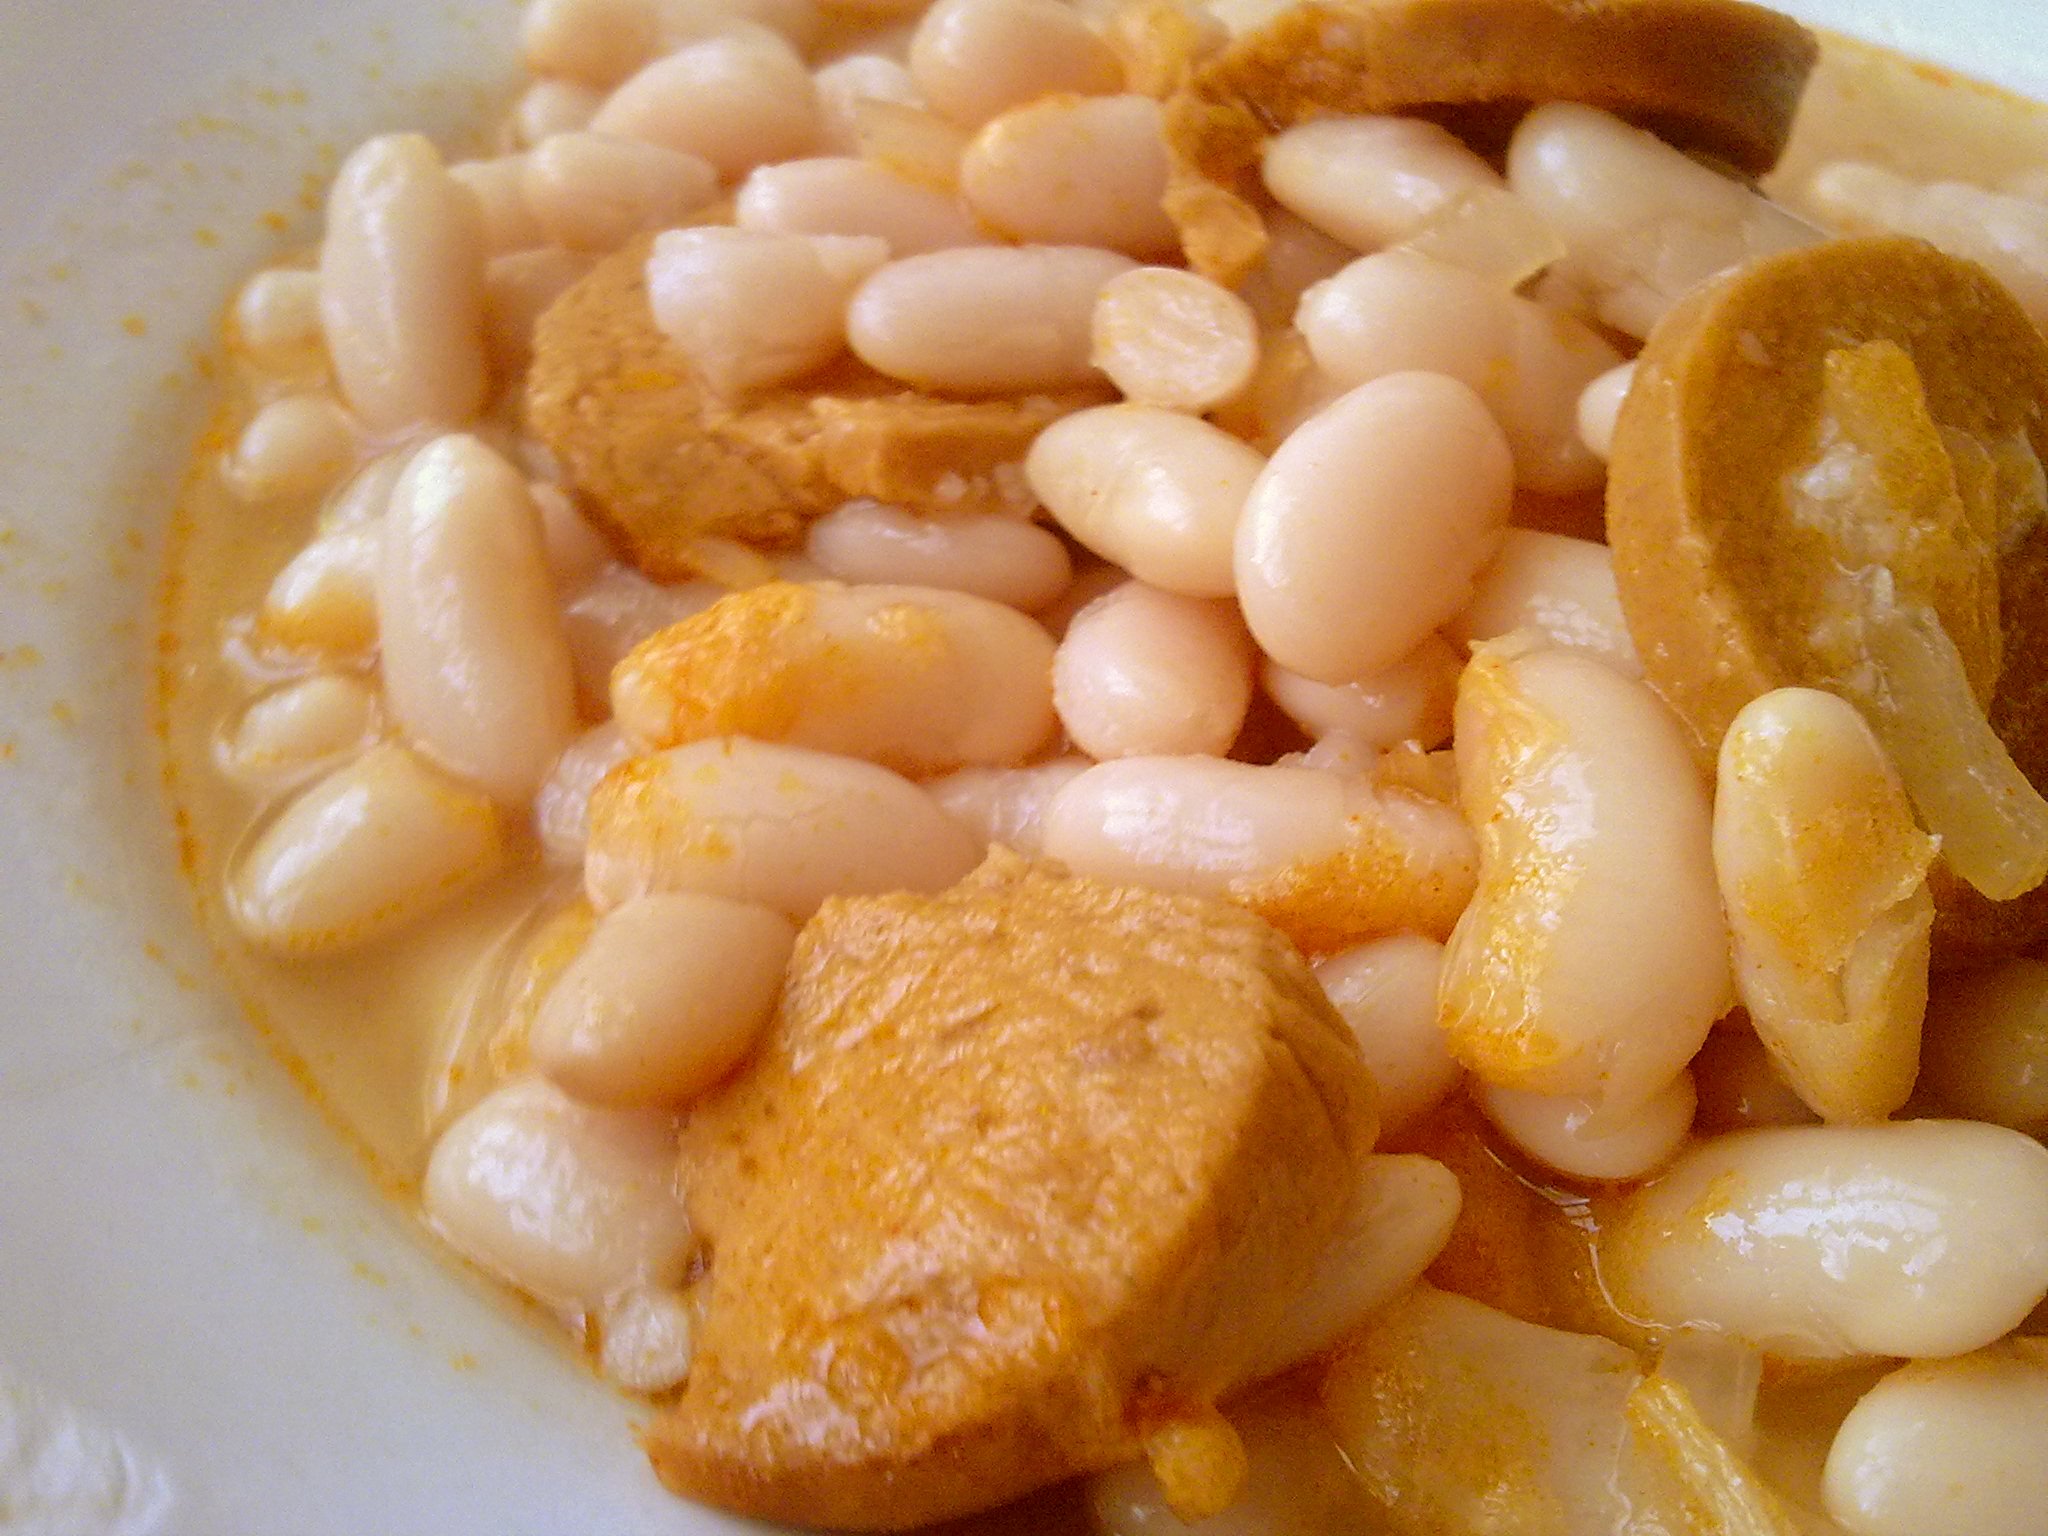 a bowl of some type of soup with beans and carrots